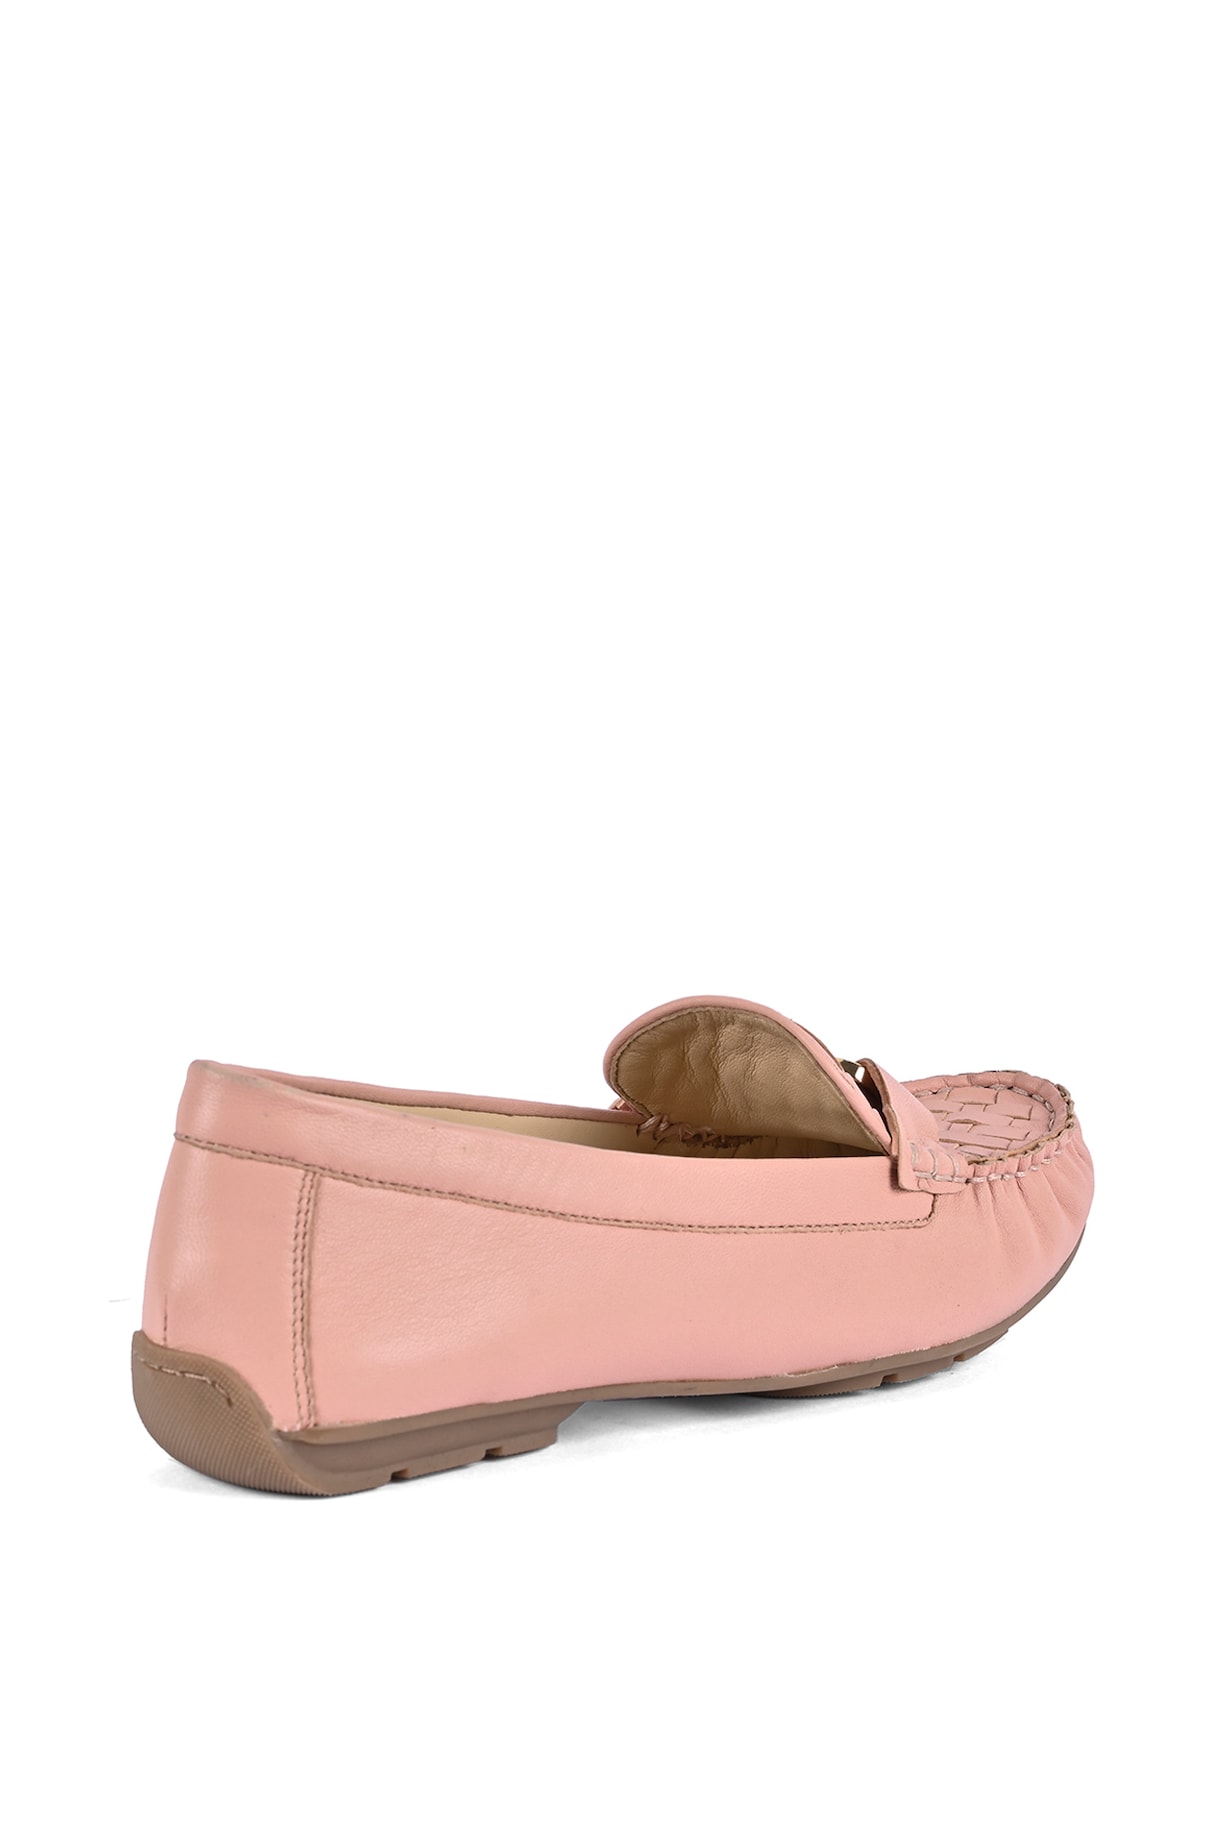 Pink Leather Moccasin Shoes Design by VANILLA MOON at Pernia's Pop Up Shop  2023